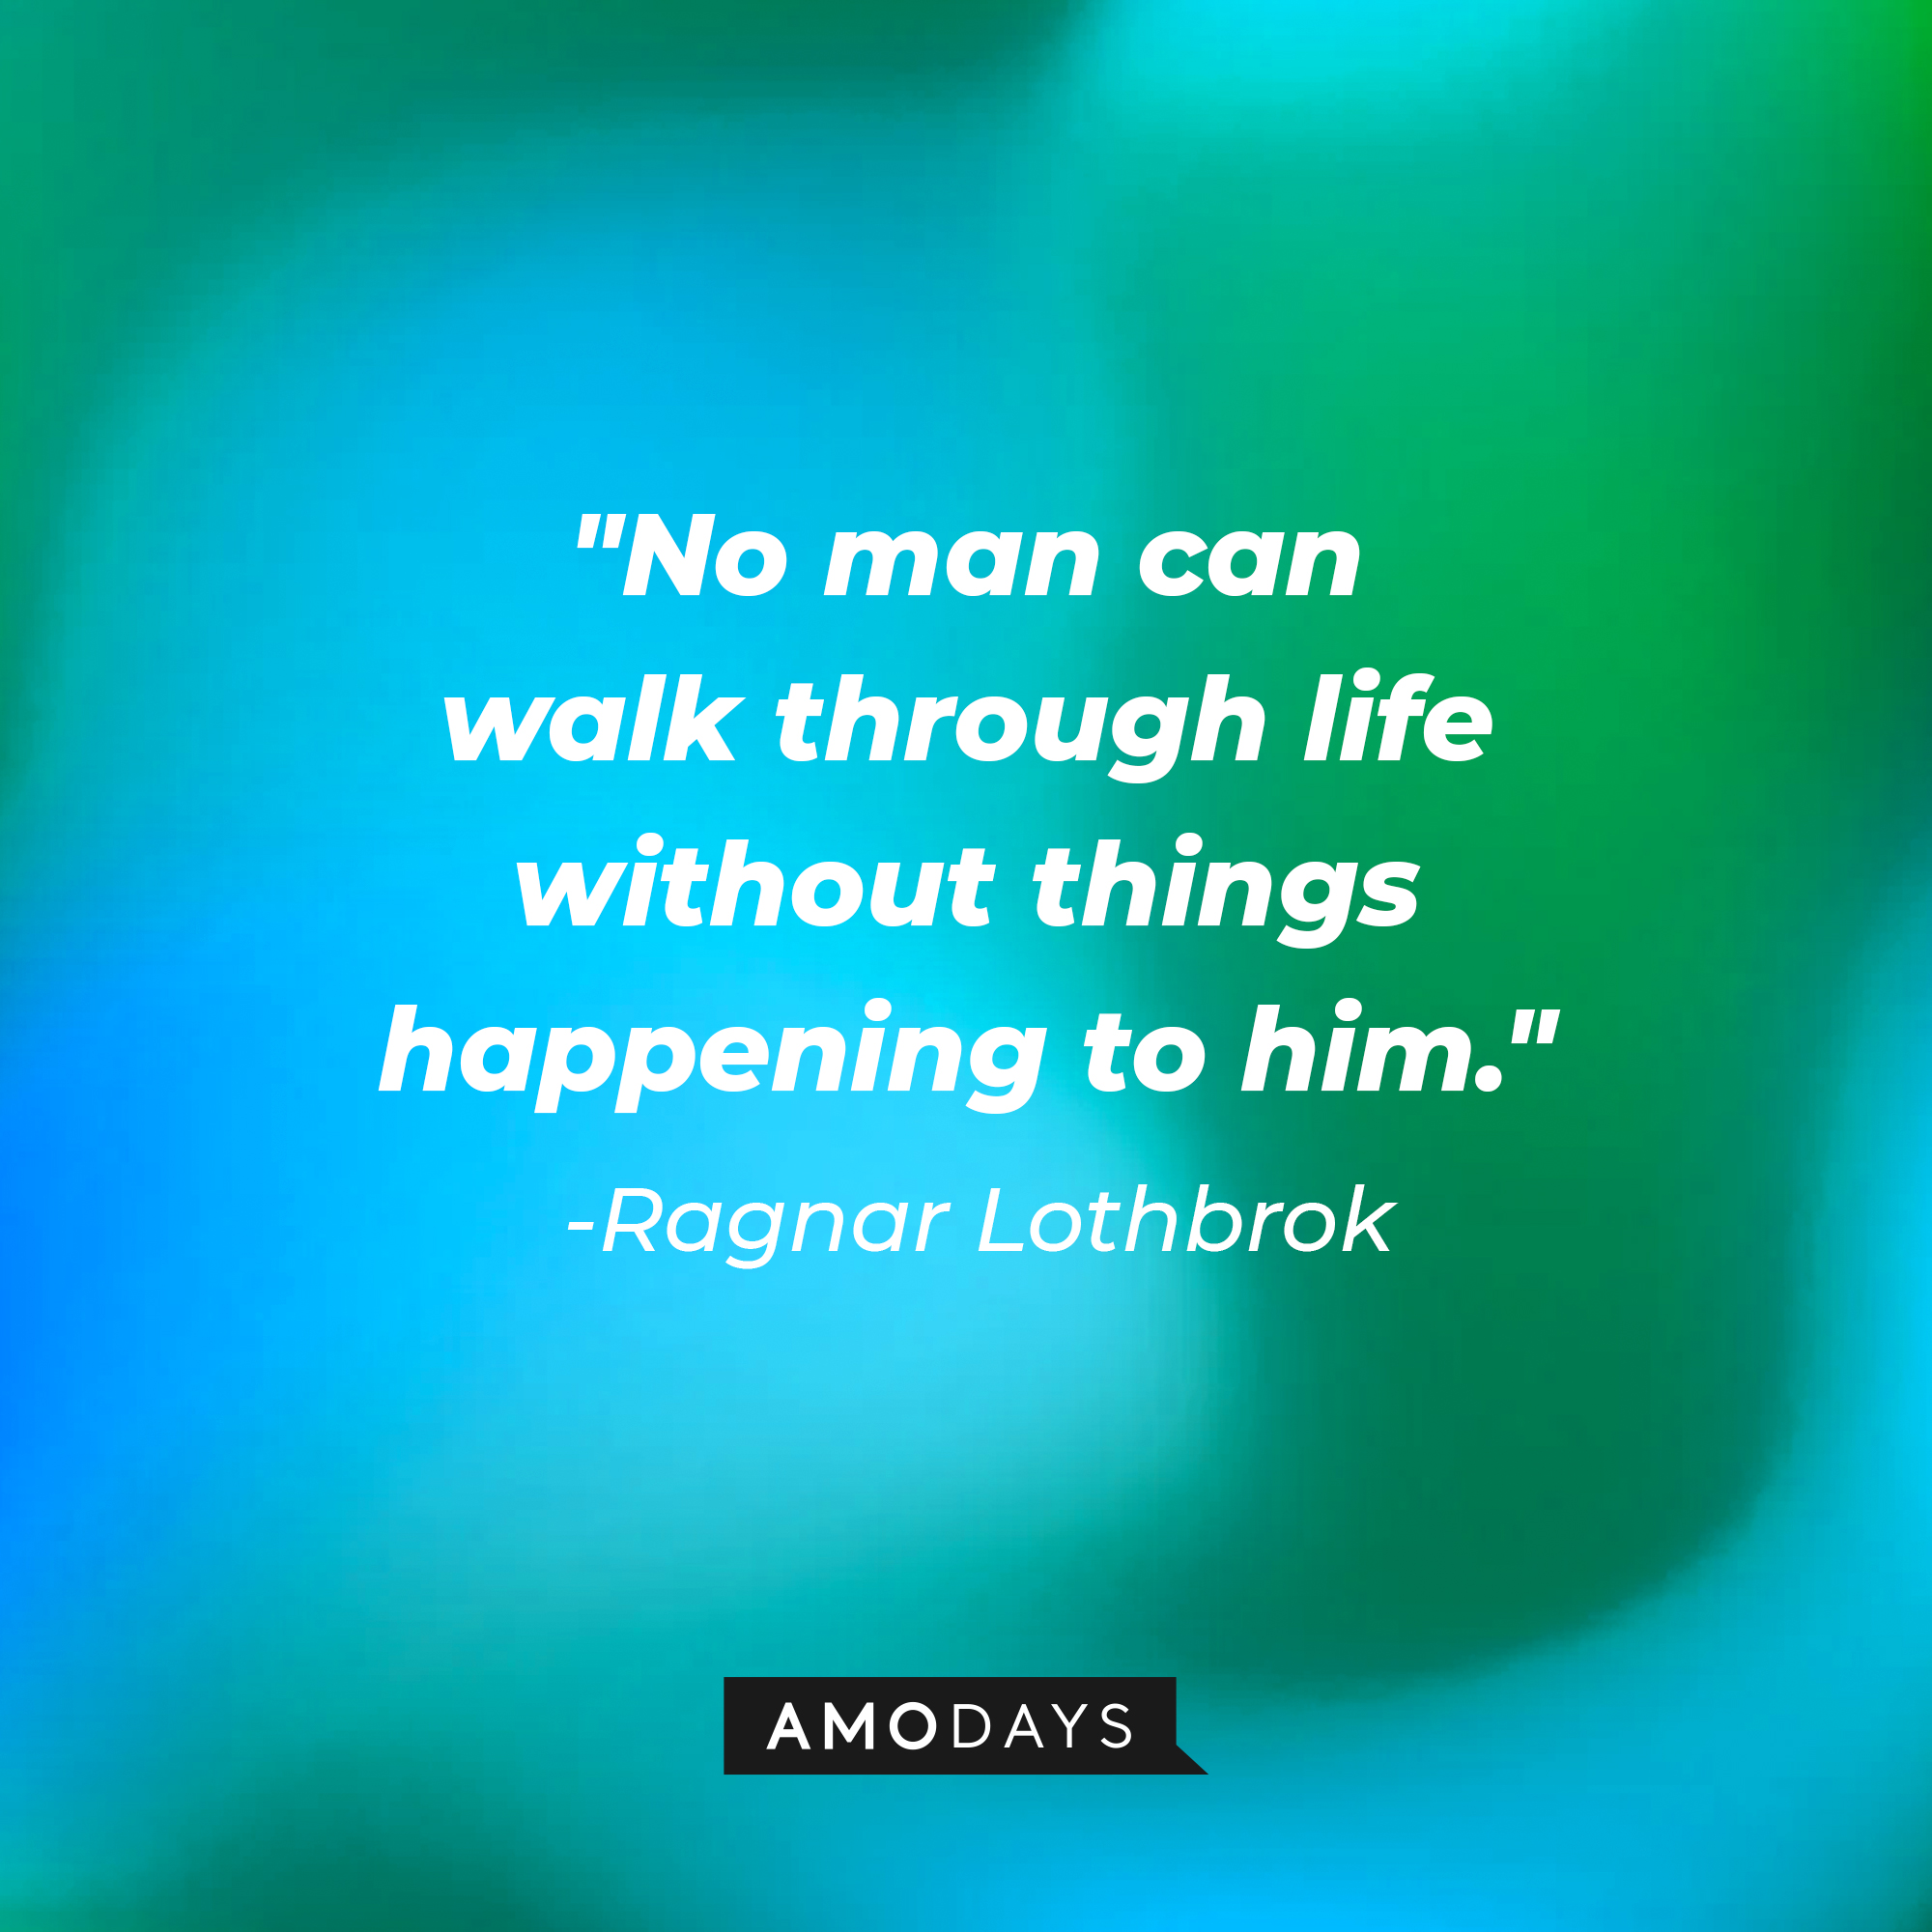 Ragnar Lothbrok's quote: "No man can walk through life without things happening to him." | Source: Amodays